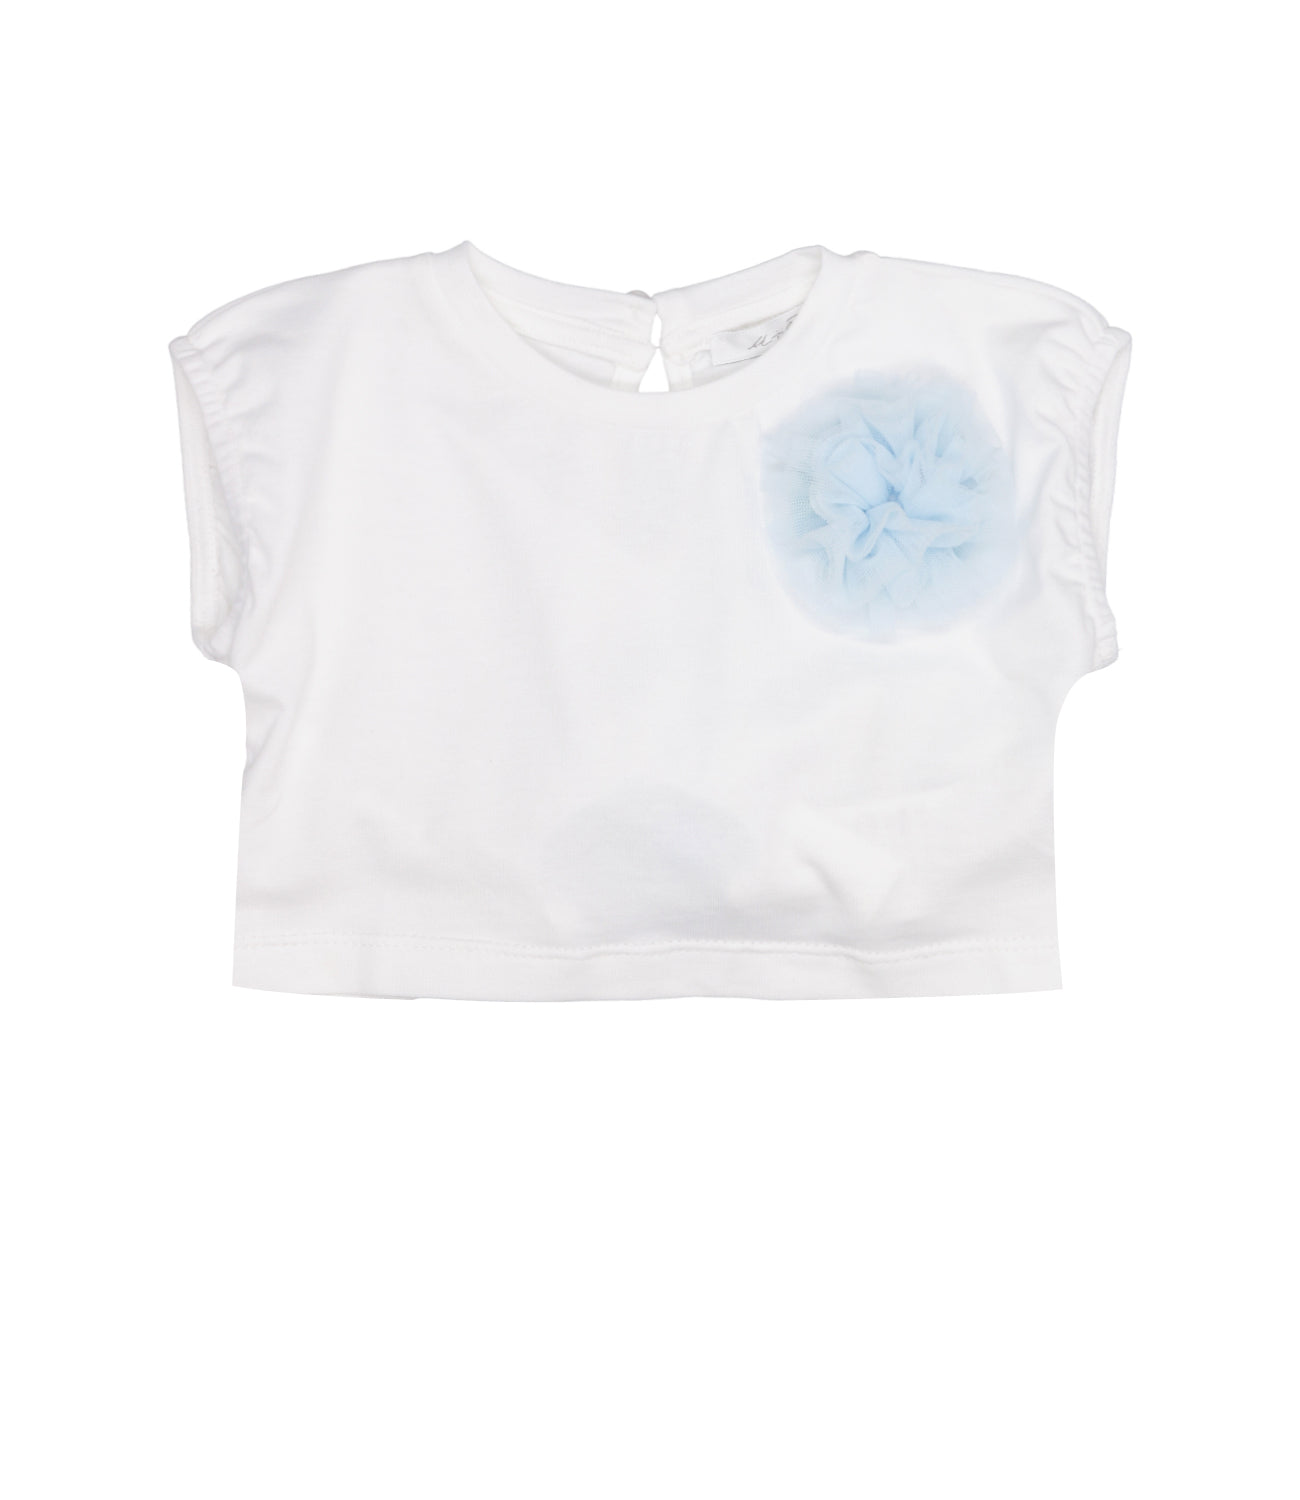 U+is By Miss Grant | T-Shirt White and Blue